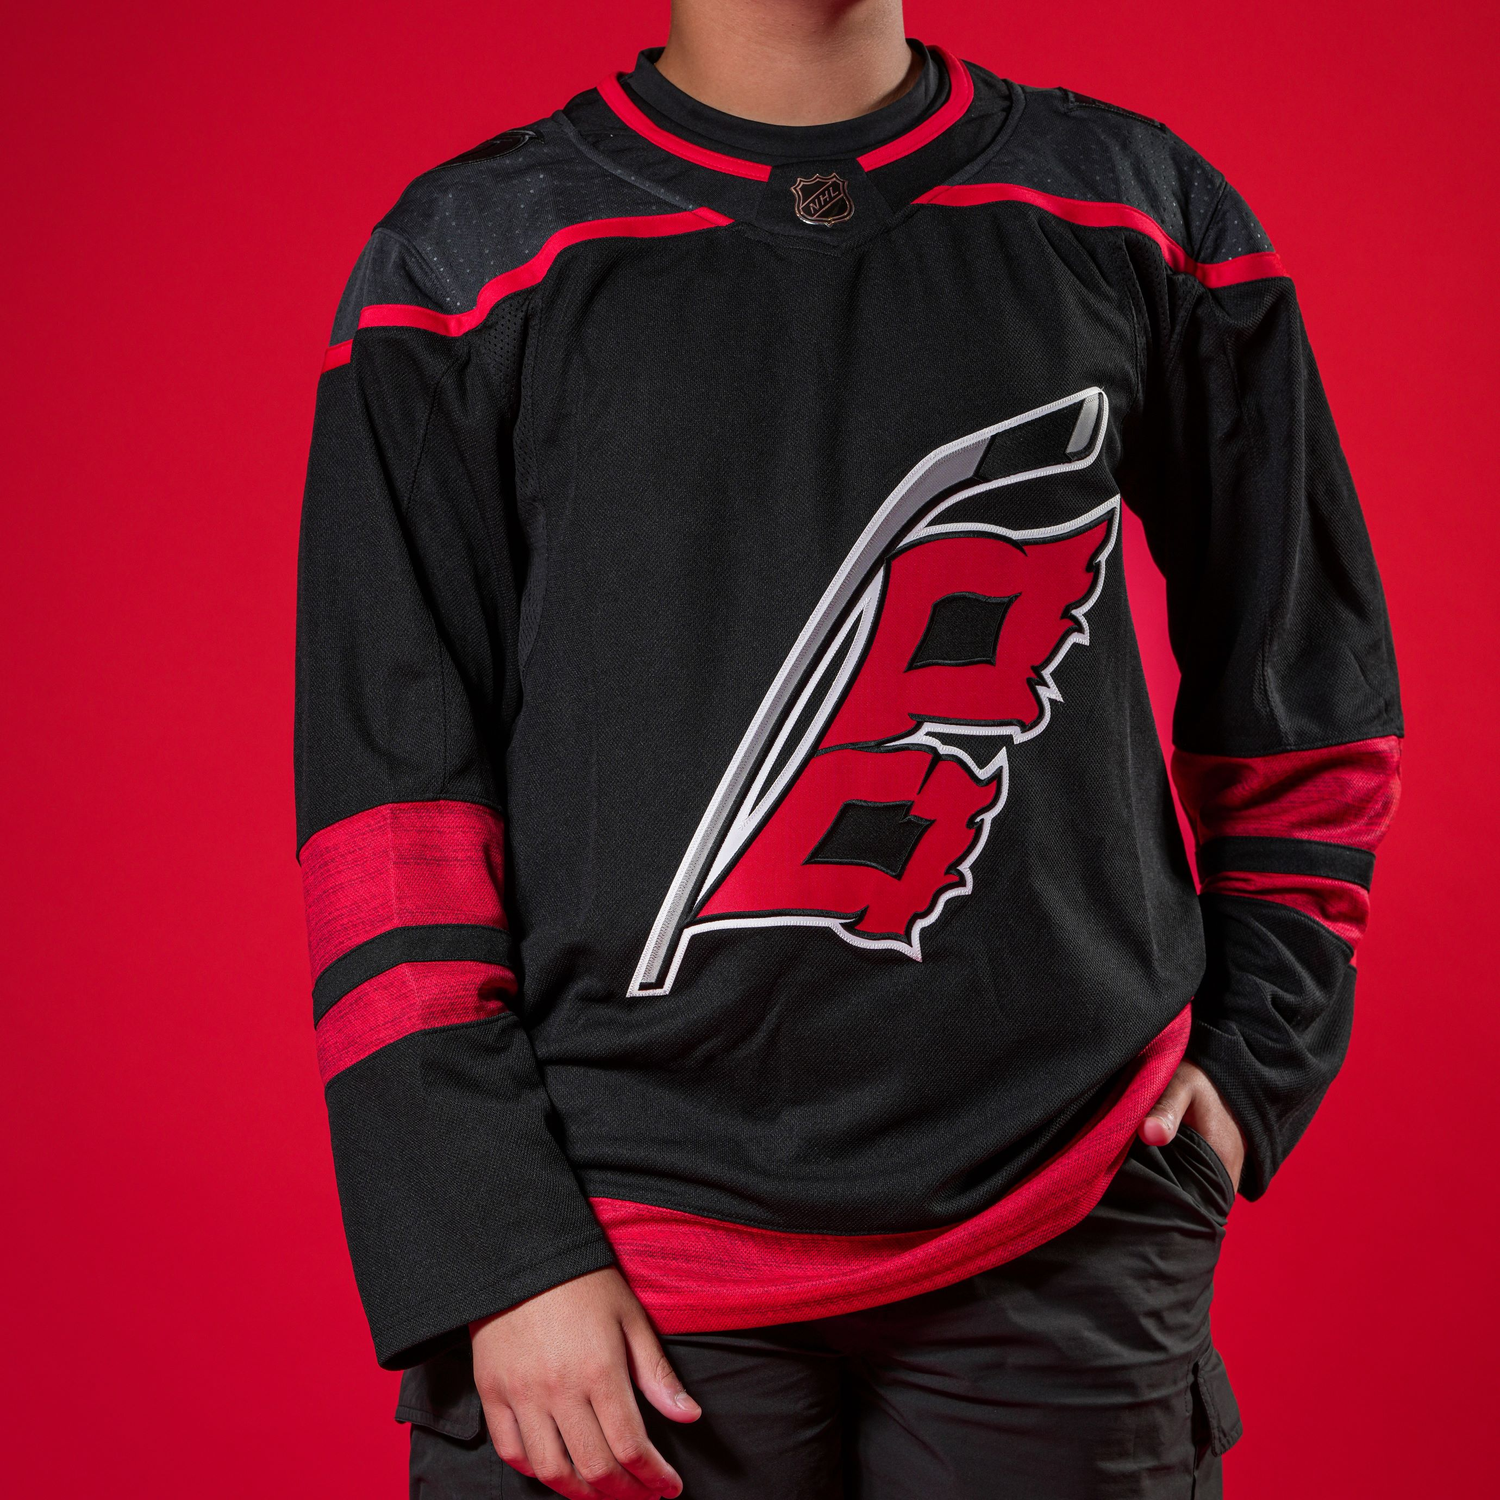 Carolina Pro Shop: Stadium Series Jersey at 108 Live Again, all sizes  available as of 9:30 AM : r/canes